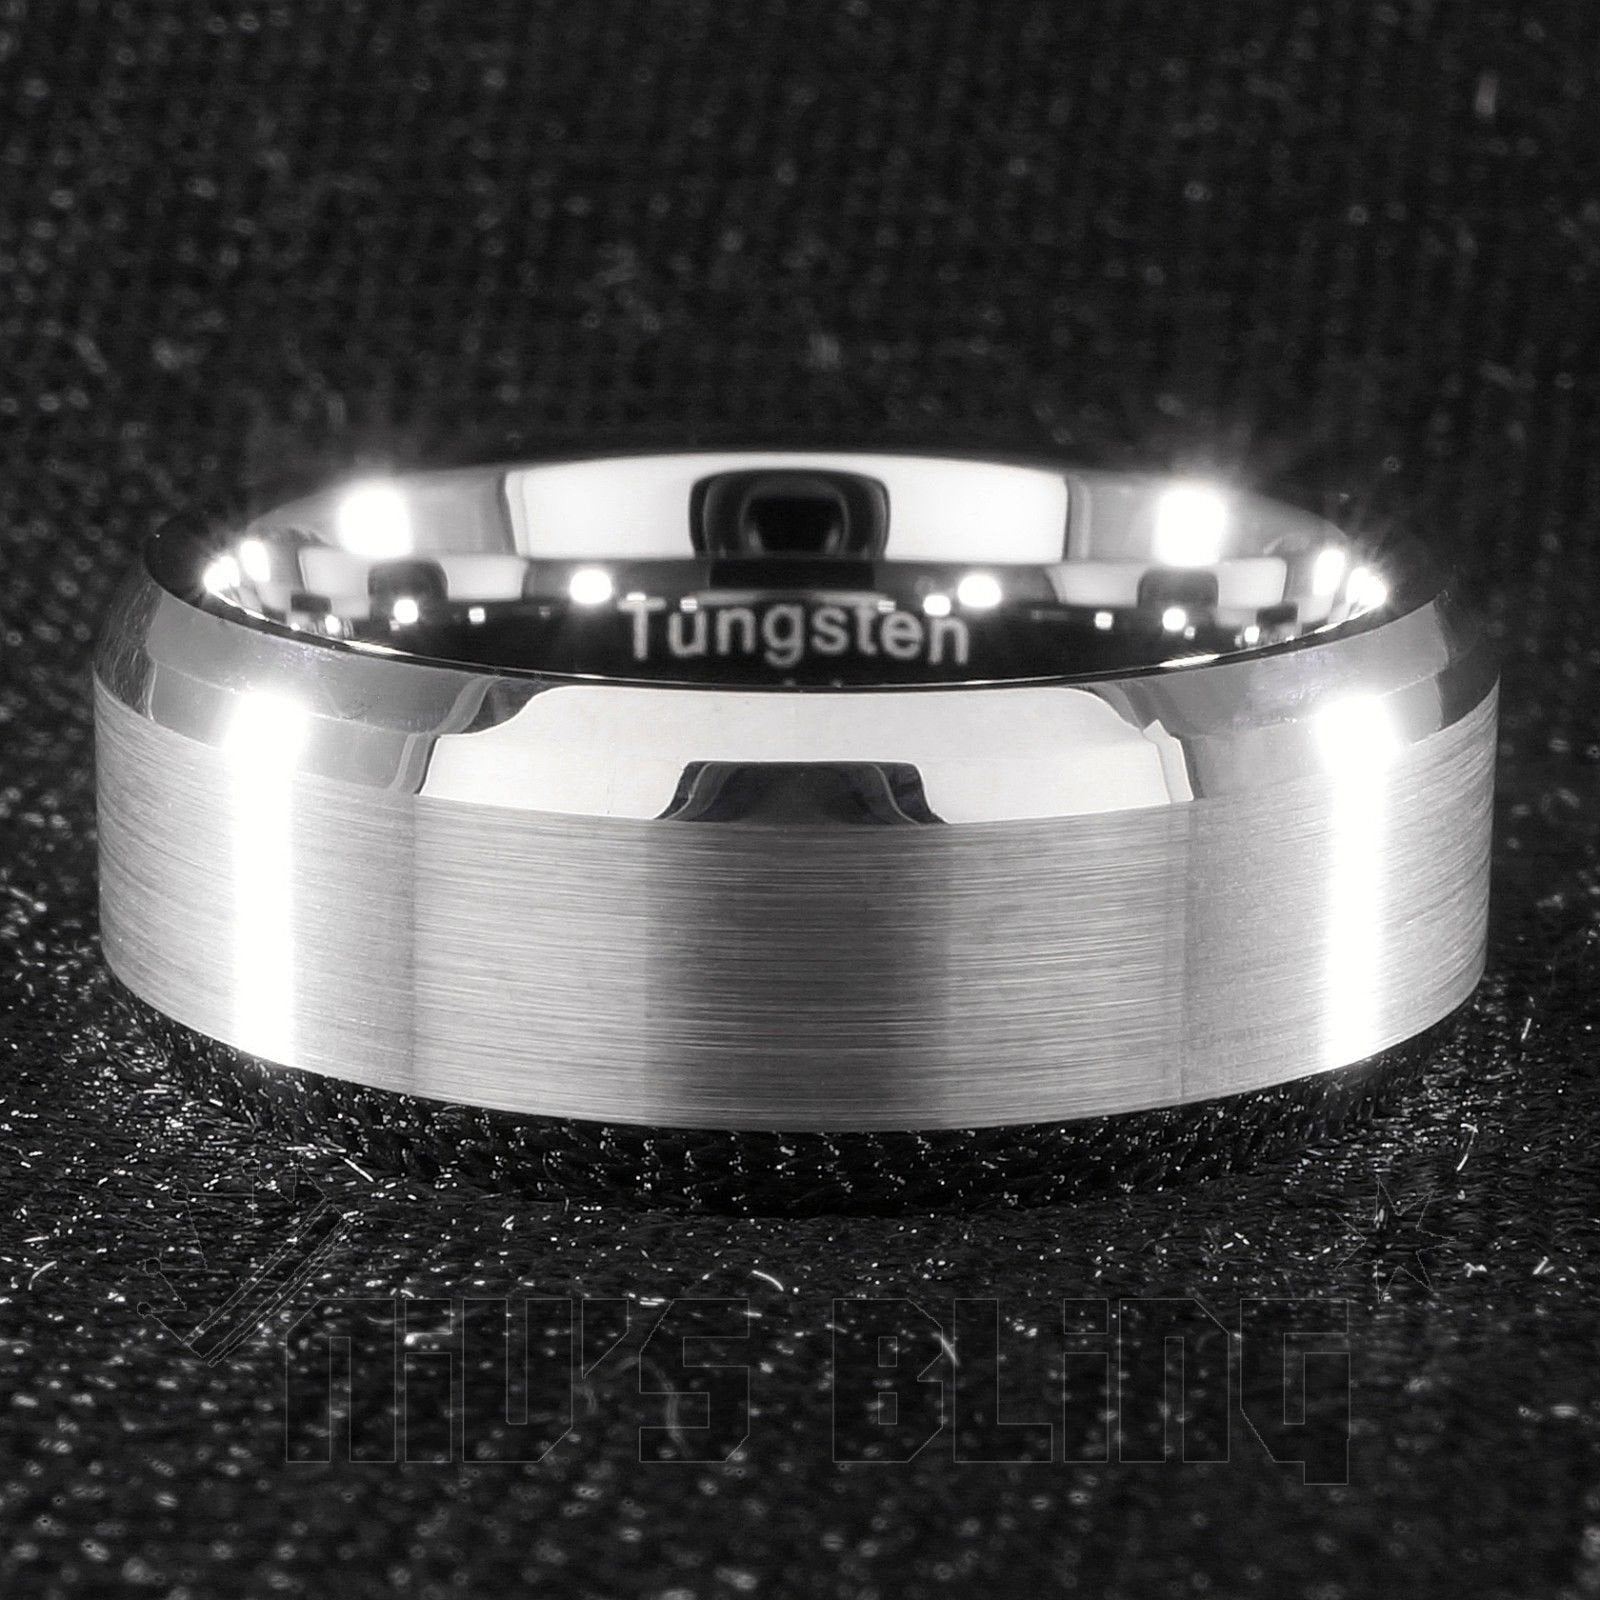 Silver Brushed Tungsten Carbide Ring 8MM